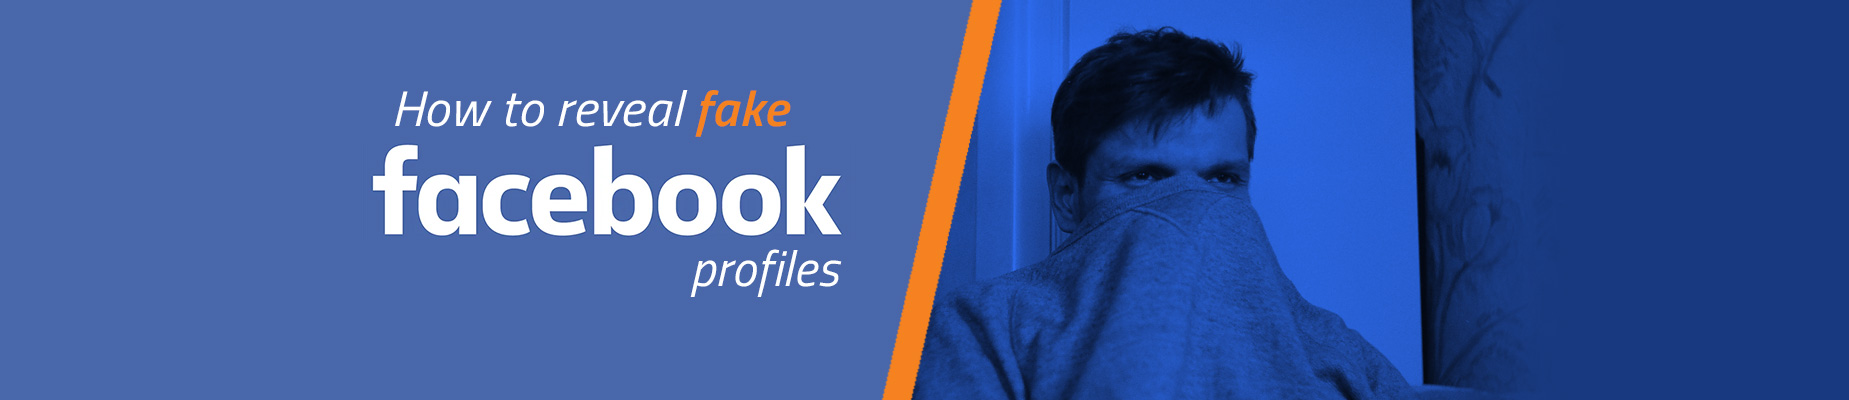 How to reveal fake Facebook profiles